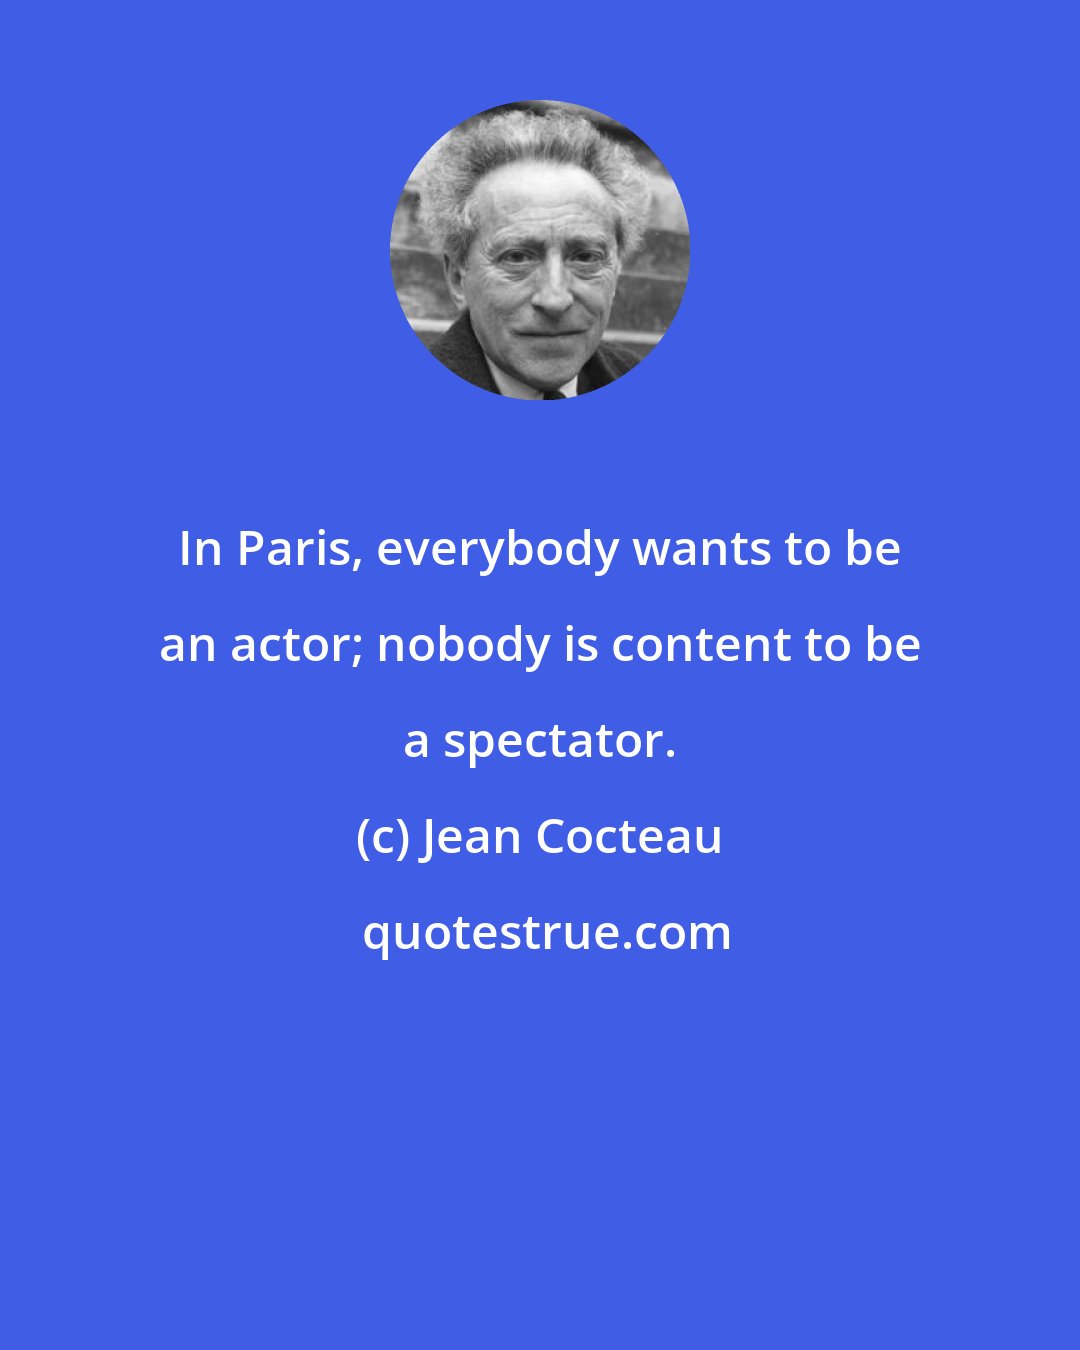 Jean Cocteau: In Paris, everybody wants to be an actor; nobody is content to be a spectator.